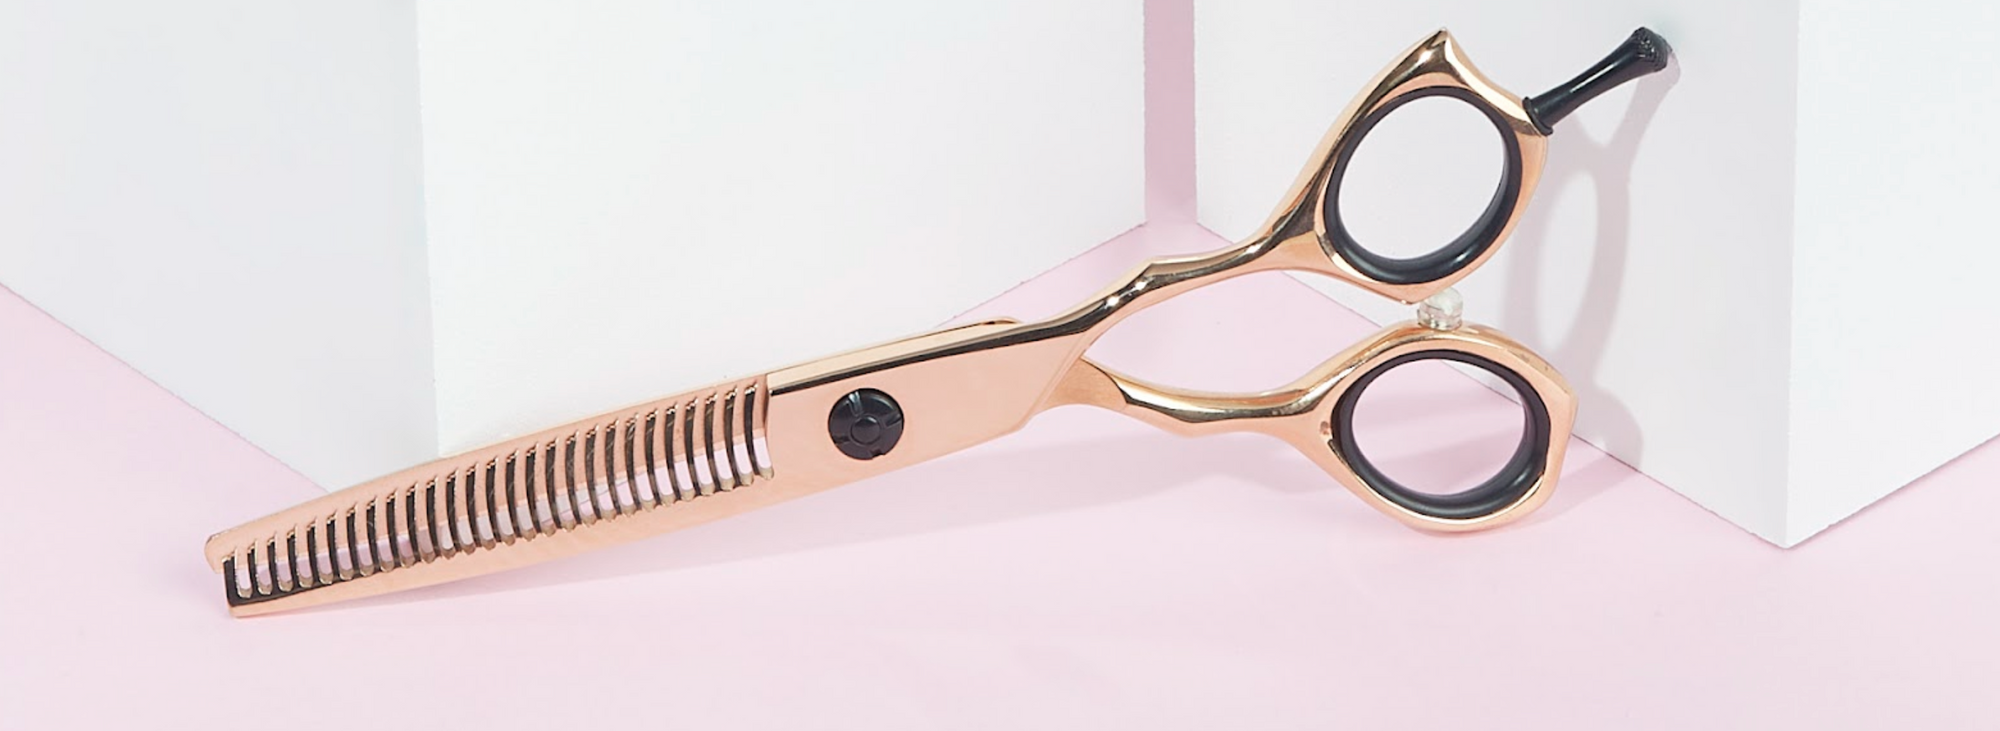 What size thinning shears should I get? (how many teeth)